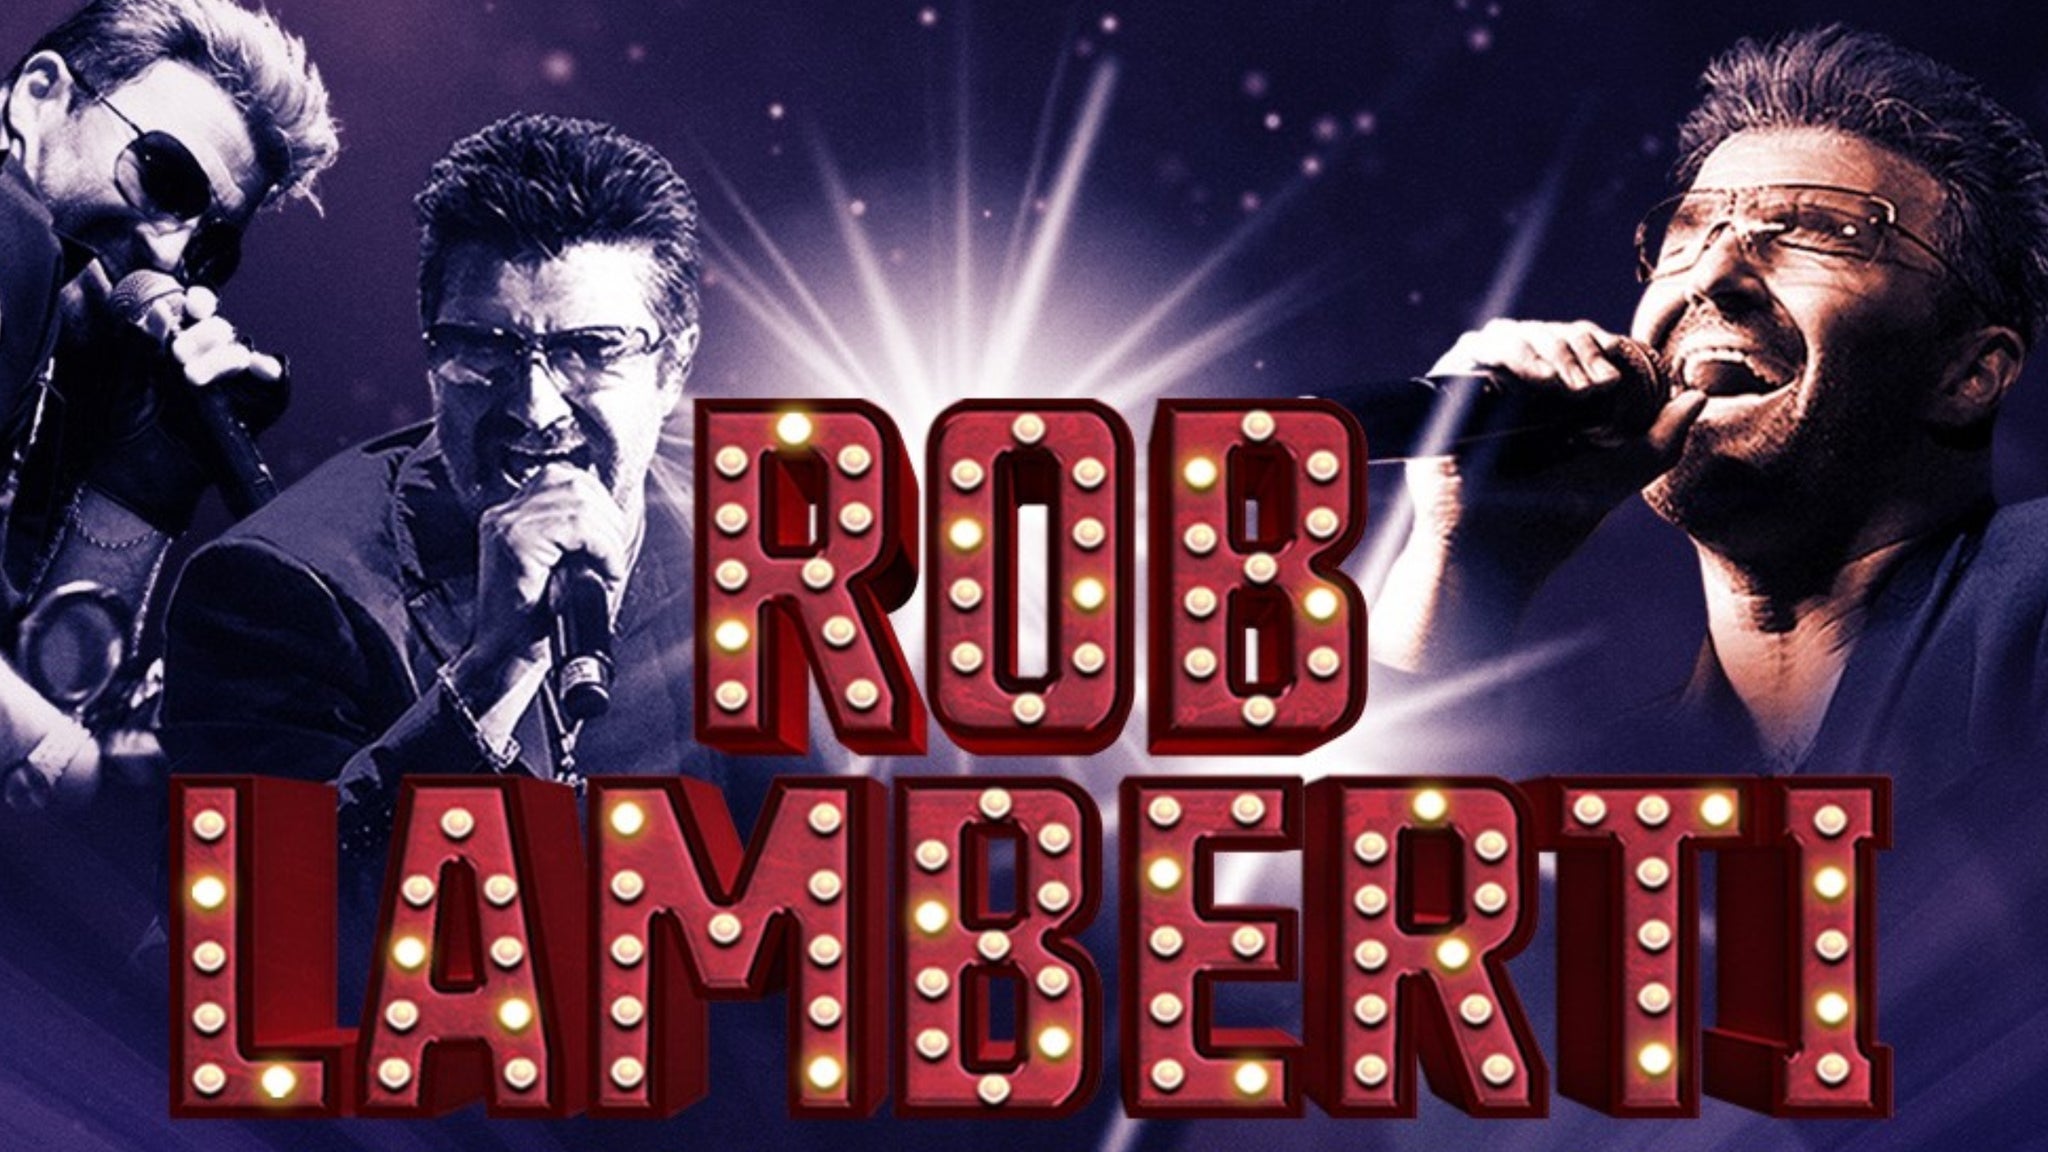 Image used with permission from Ticketmaster | Rob Lamberti - George Michael At Christmas tickets